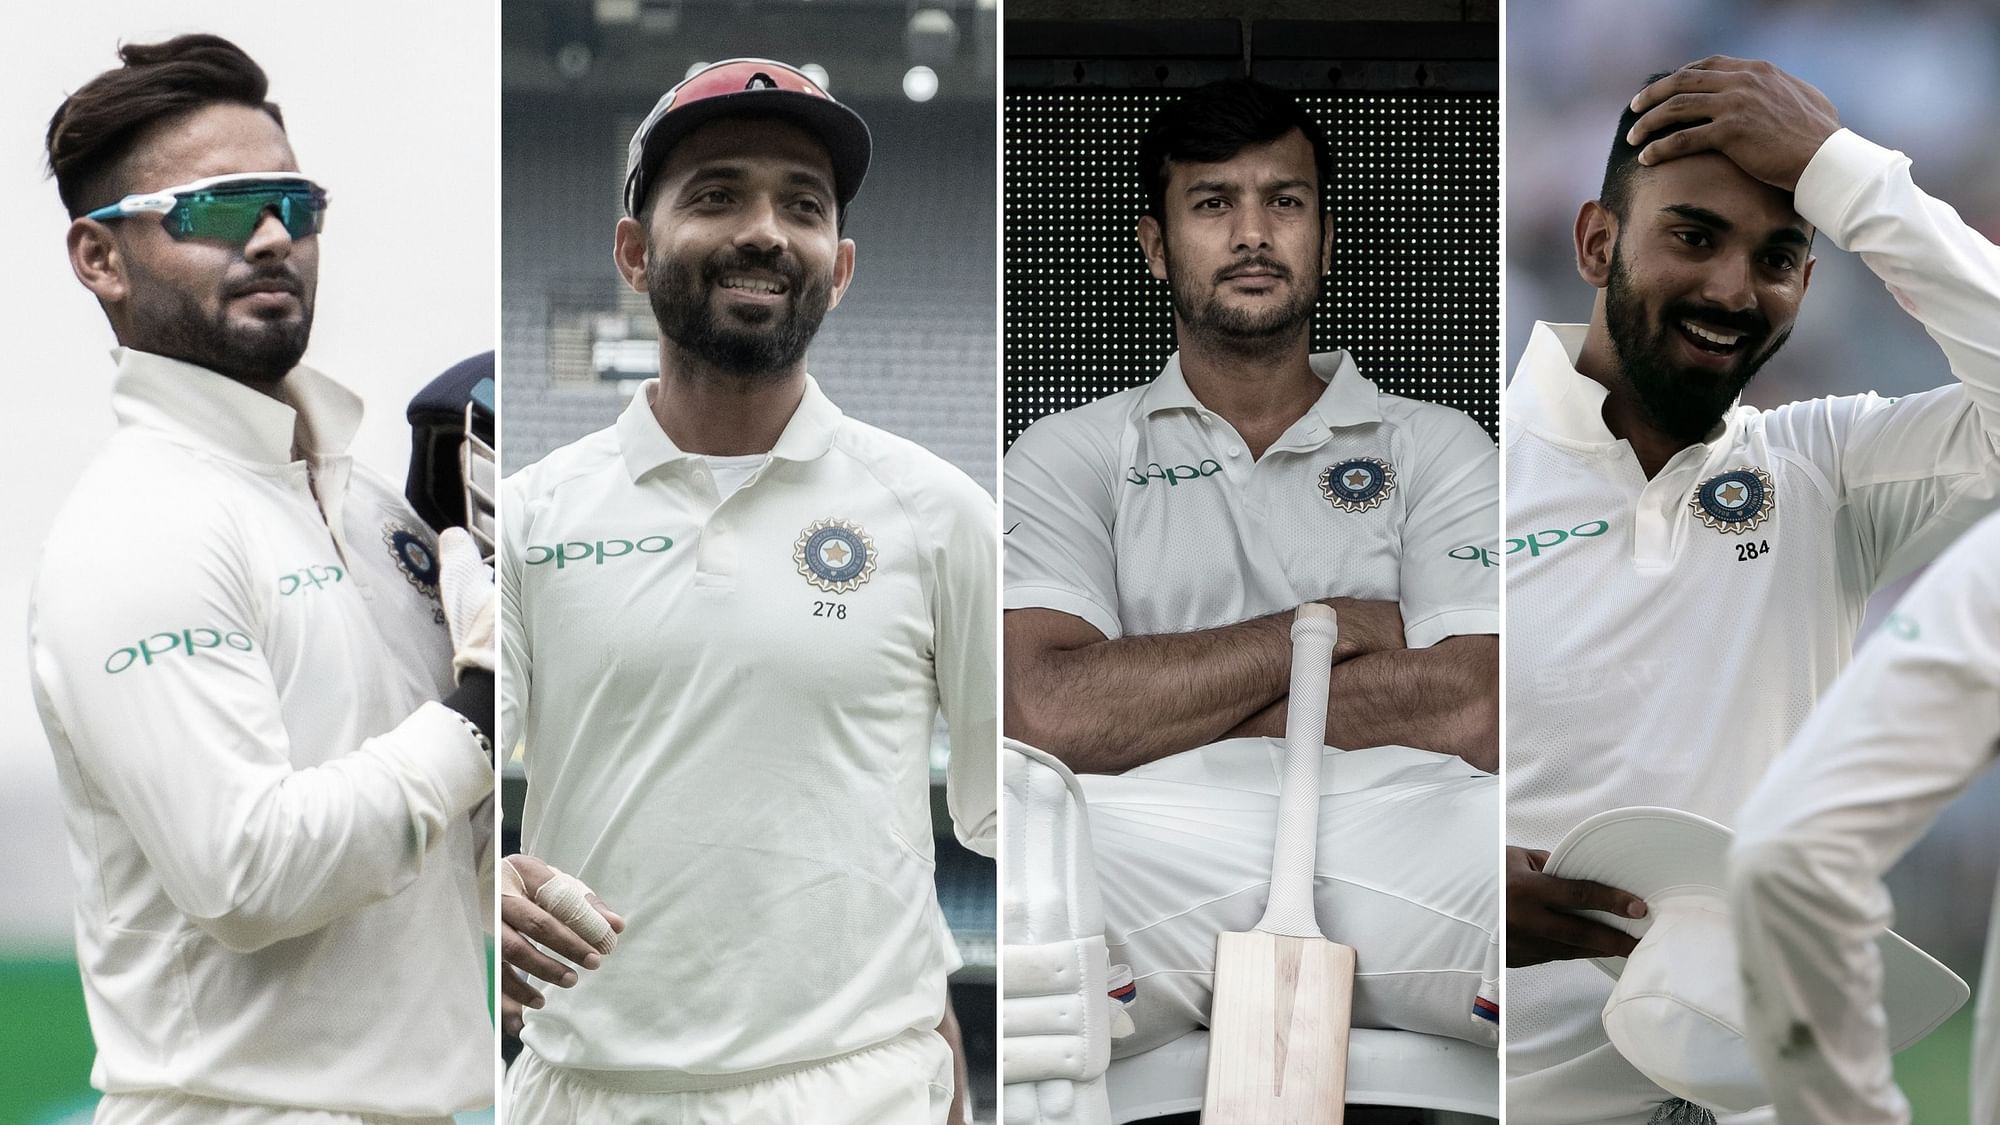 Rishabh Pant and Mayank Agarwal made the most of their opportunities, but Ajinkya Rahane and KL Rahul could not step up.